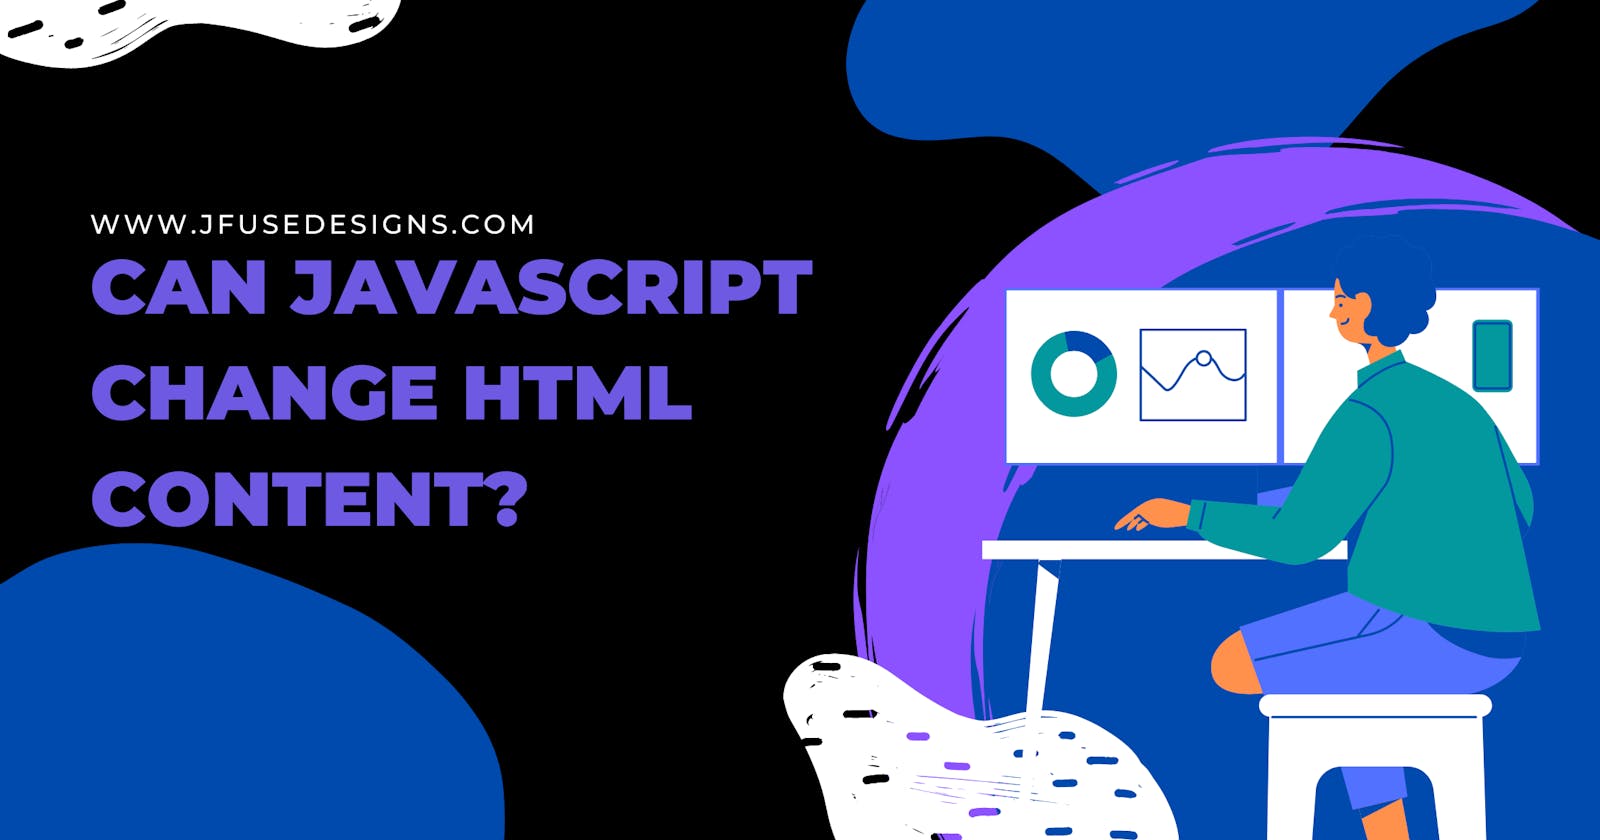 Can Javascript change HTML content?